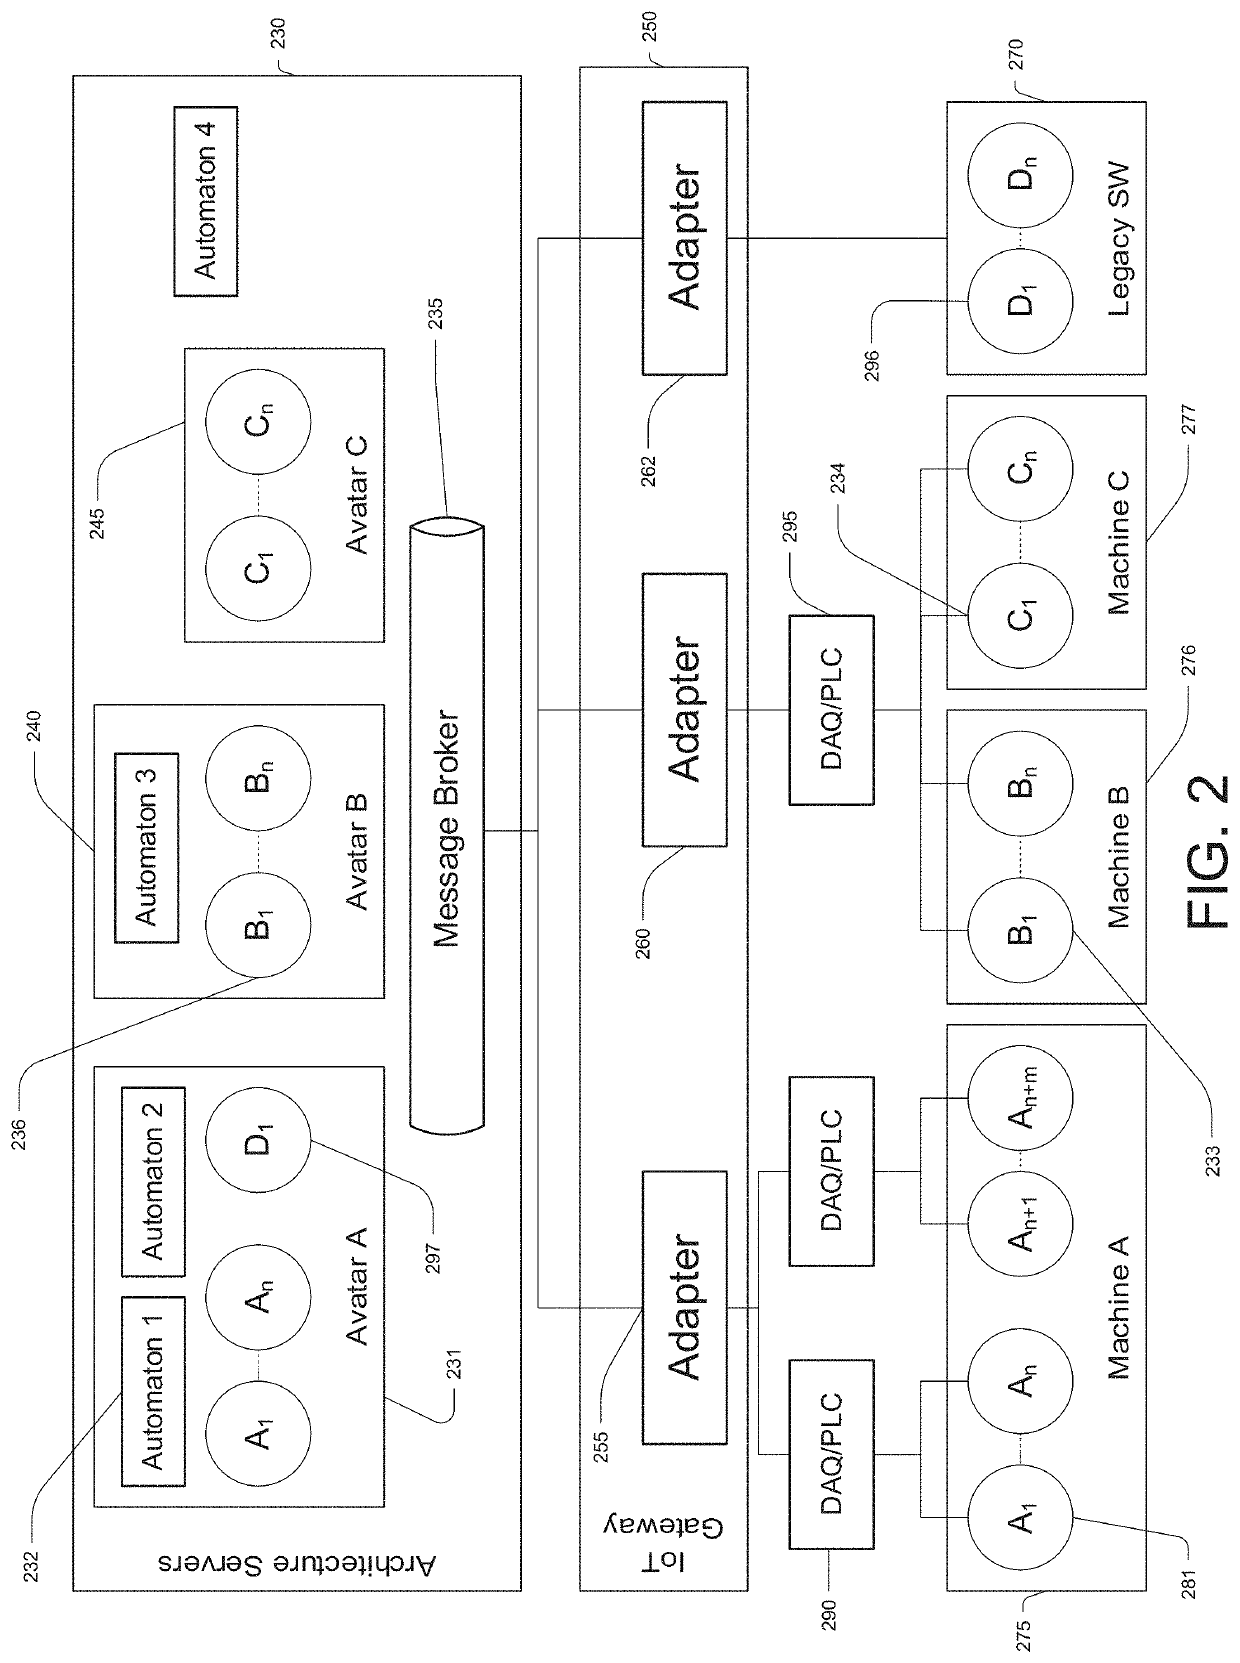 Systems, devices, and methods for internet of things integrated automation and control architectures